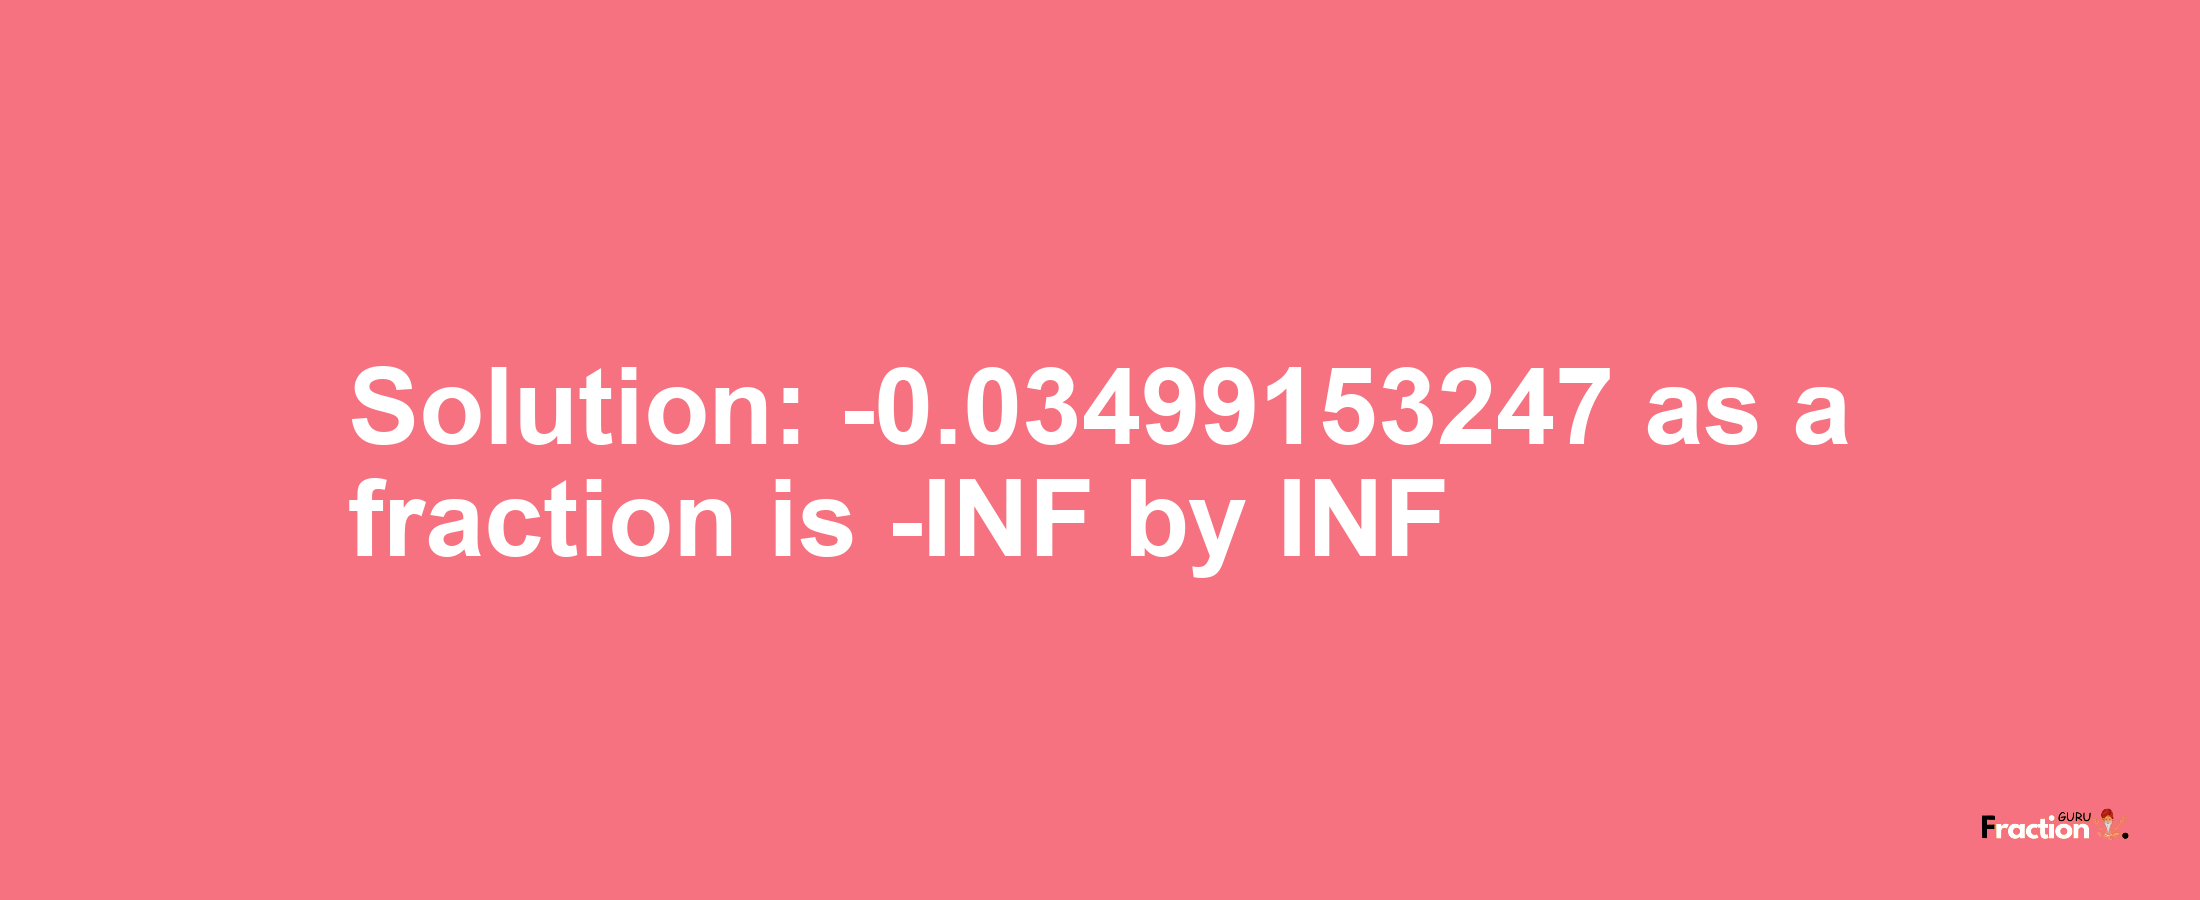 Solution:-0.03499153247 as a fraction is -INF/INF